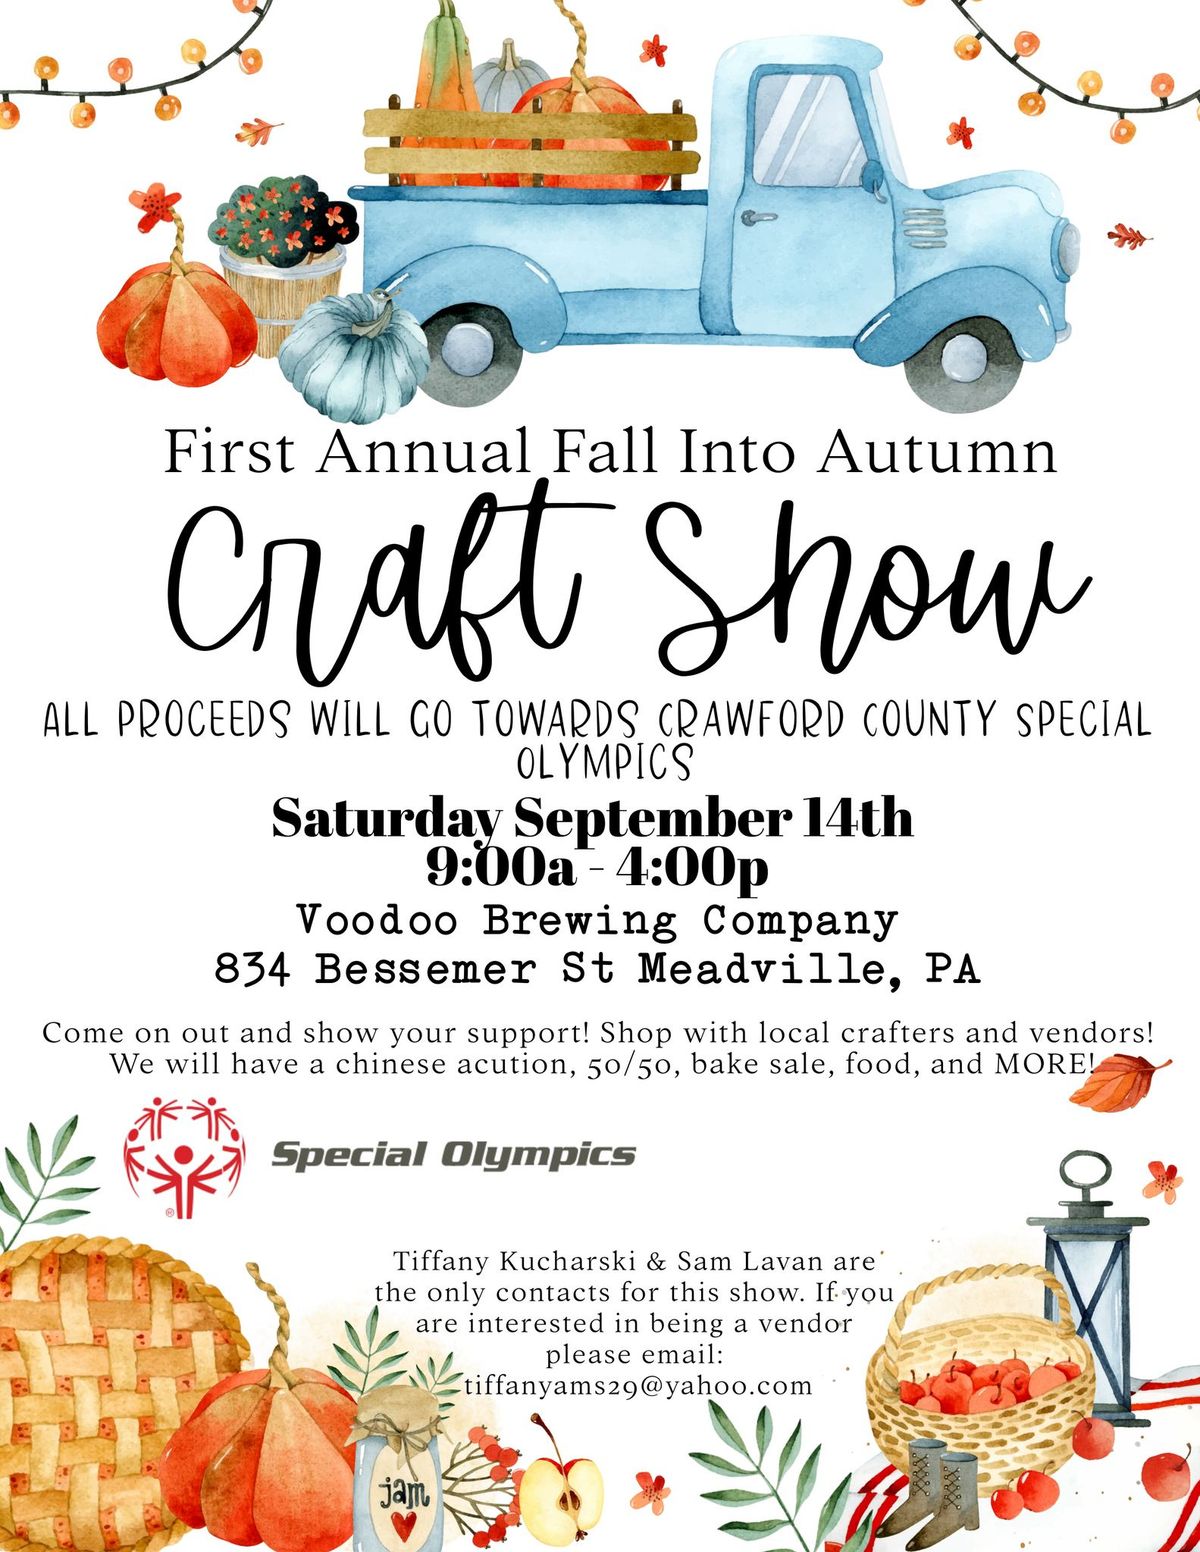 1st Annual Fall Into Autumn Craft Show Benefiting Crawford County Special Olympics